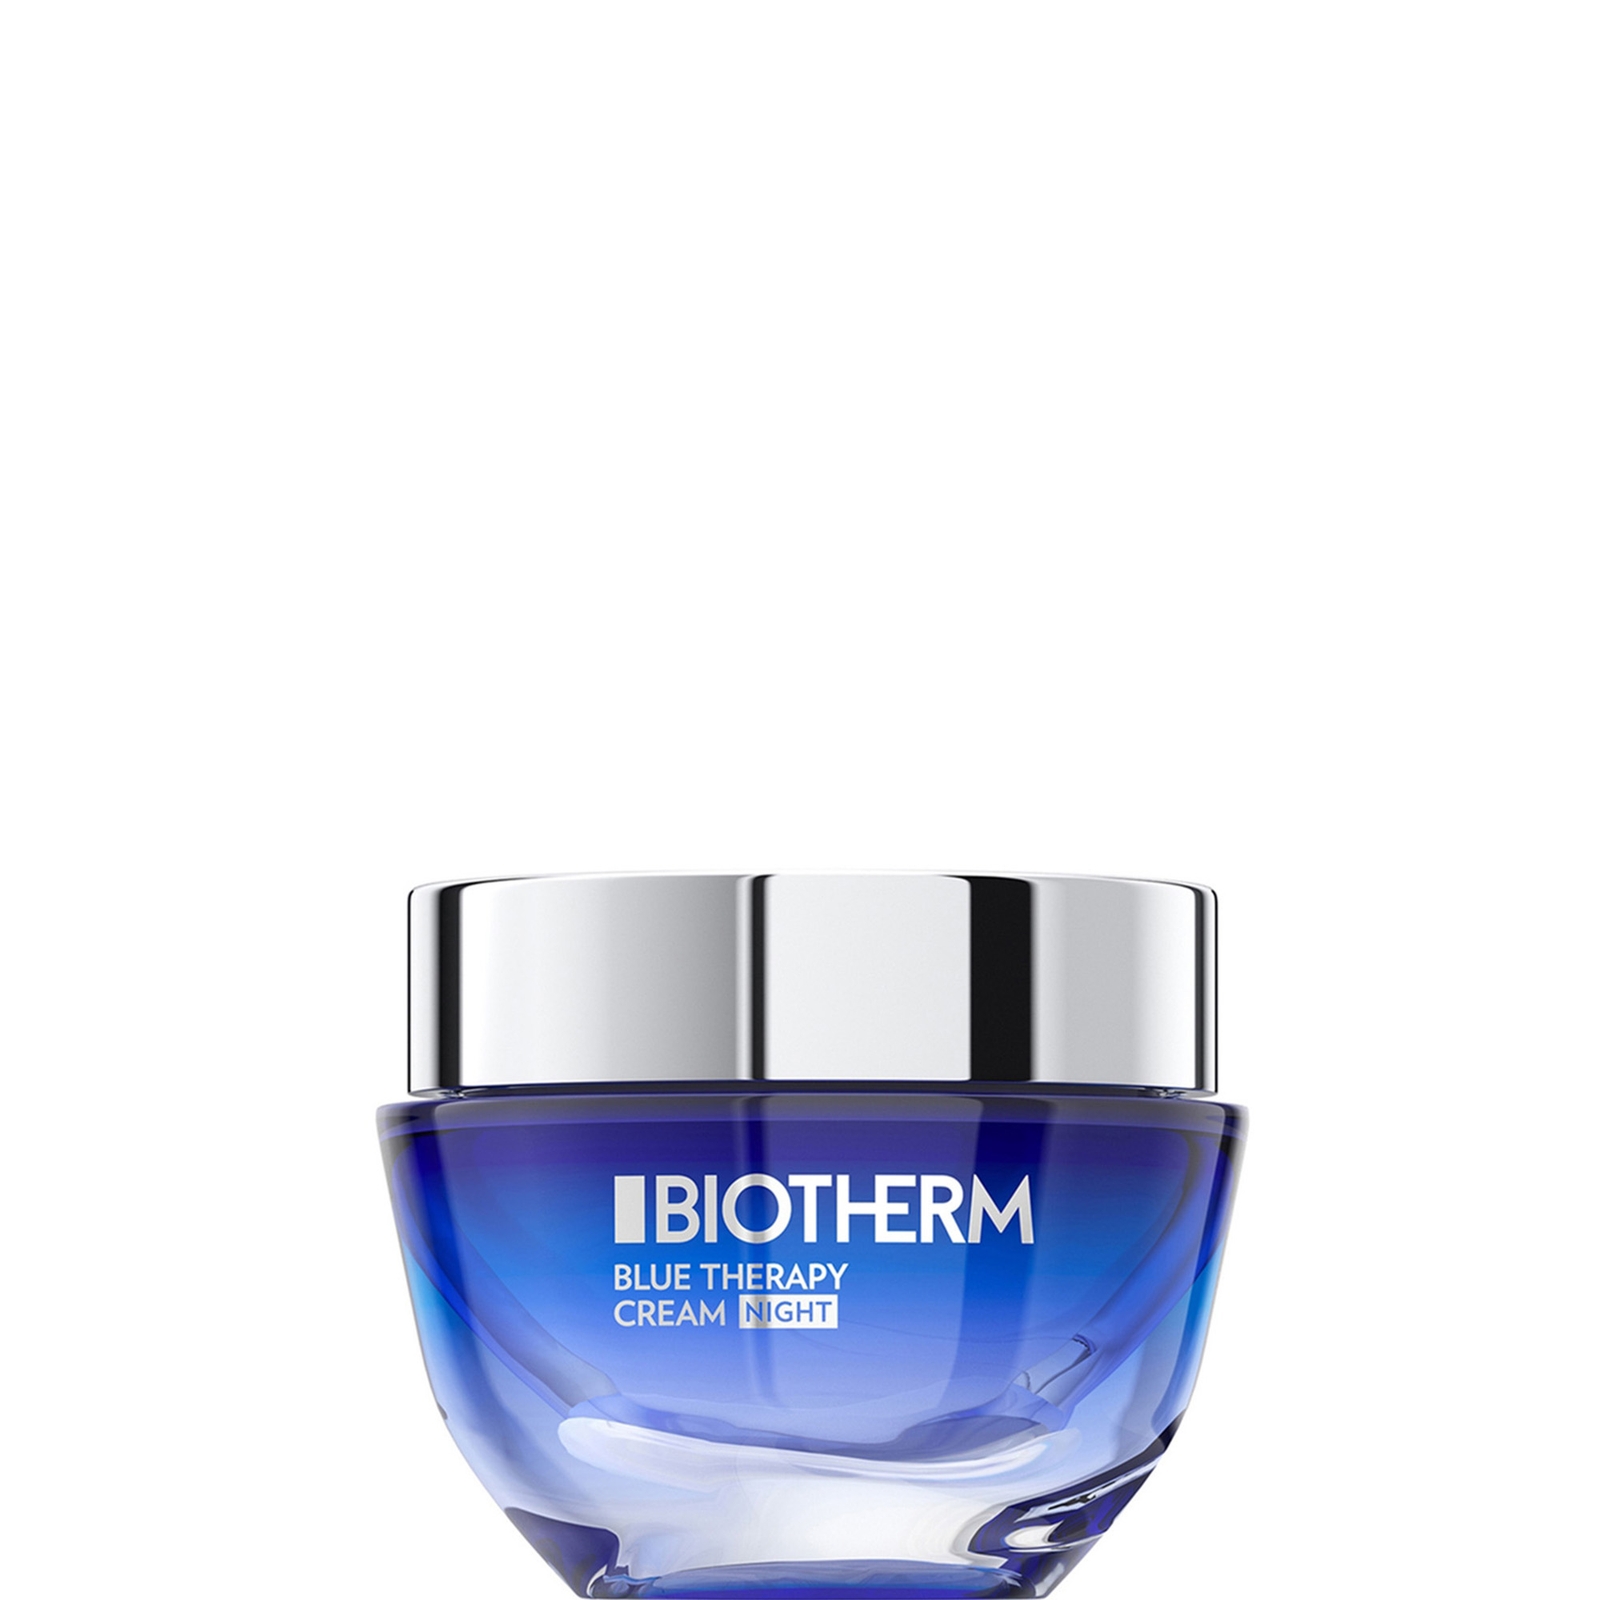 Image of Biotherm Blue Therapy crema notte 50 ml